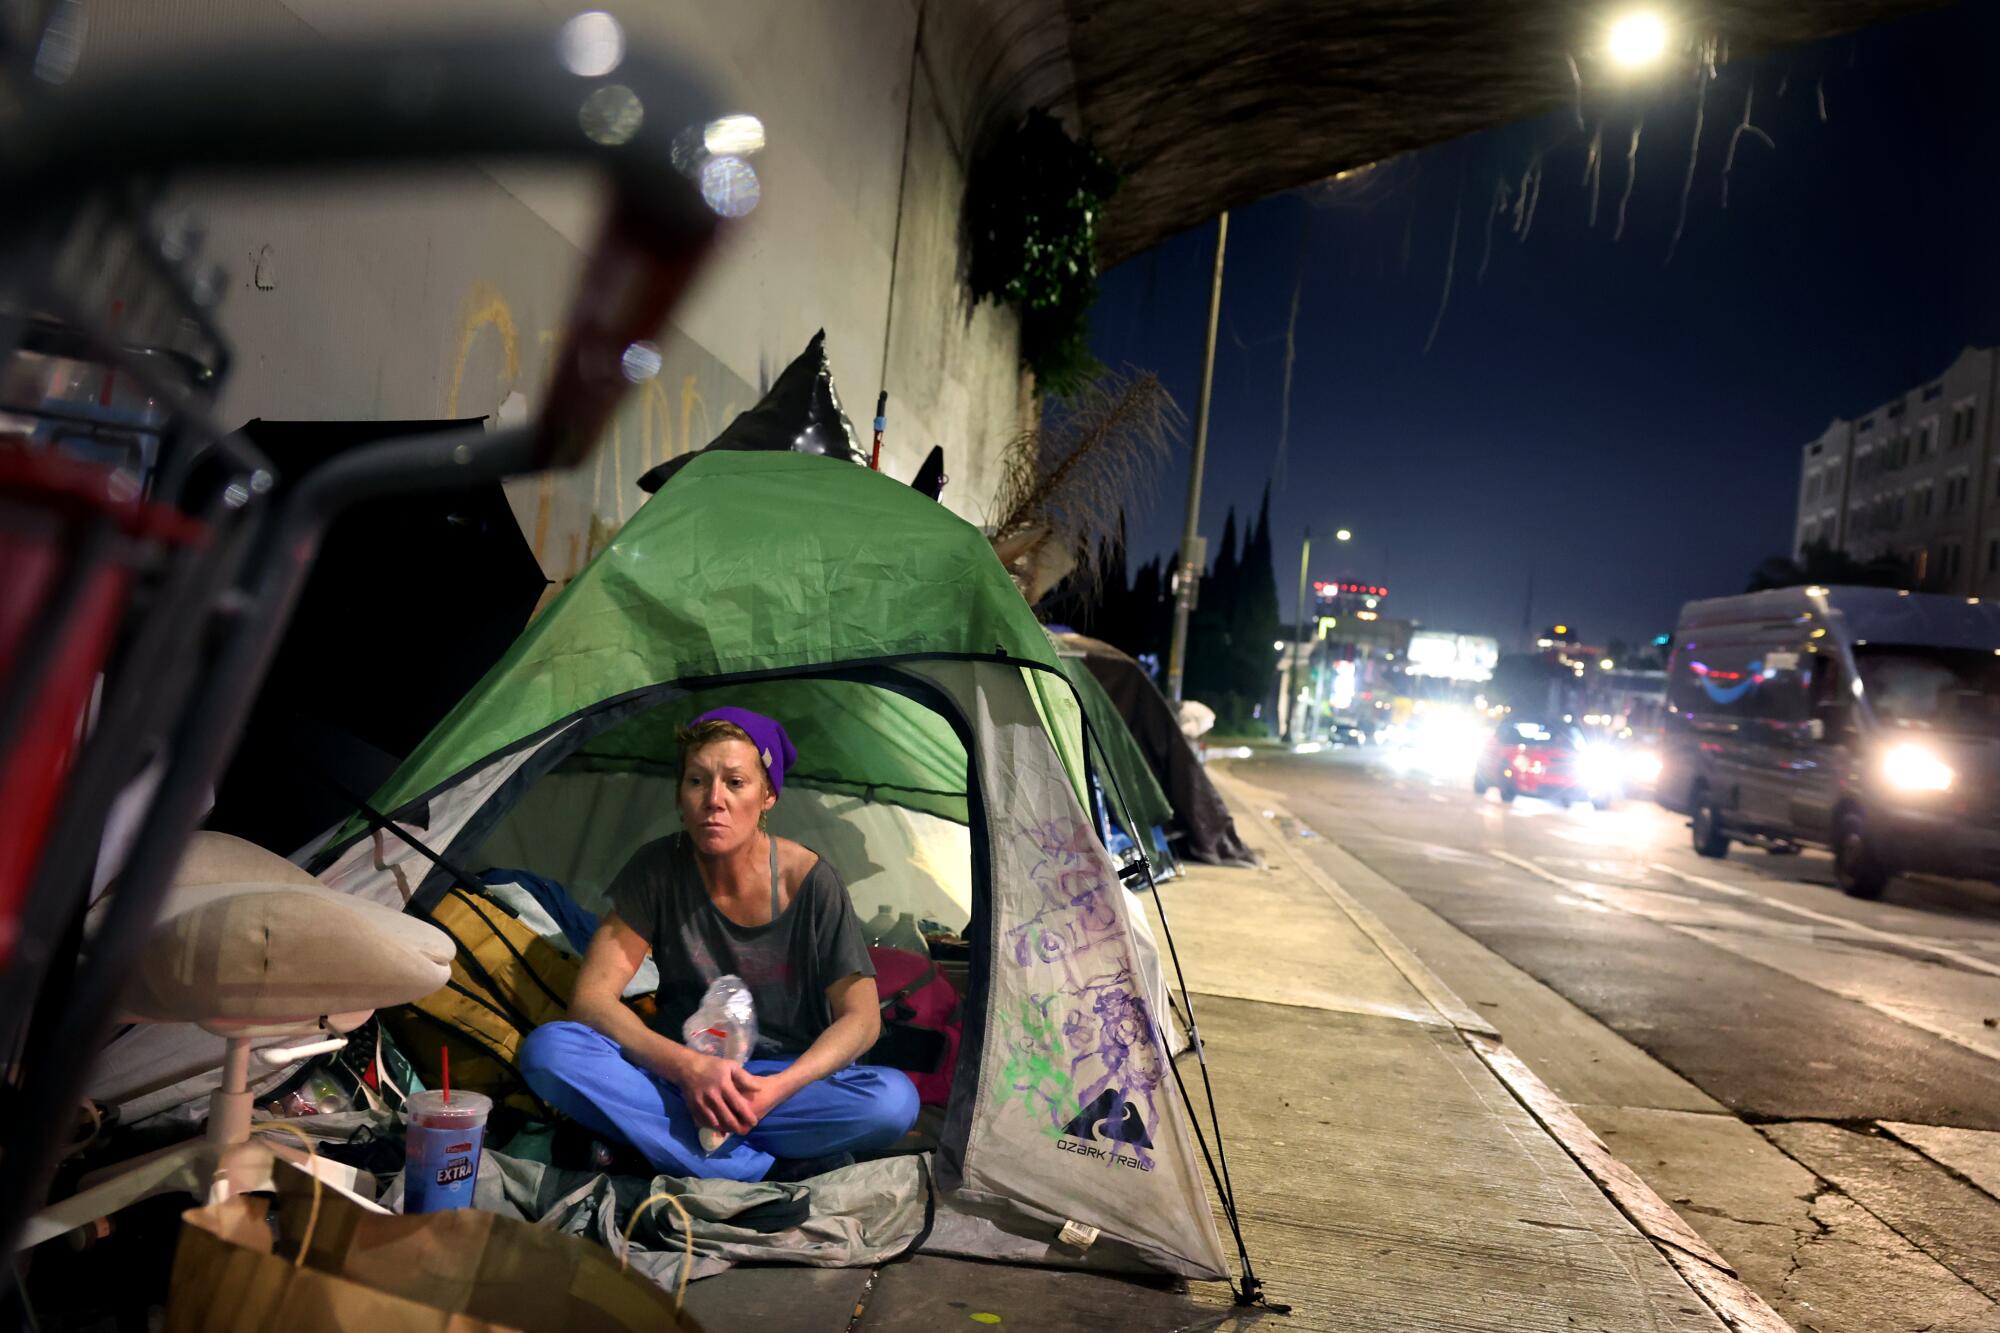 A homeless woman eats marshmallows at a homeless encampment under the 101 Freeway in Hollywood.